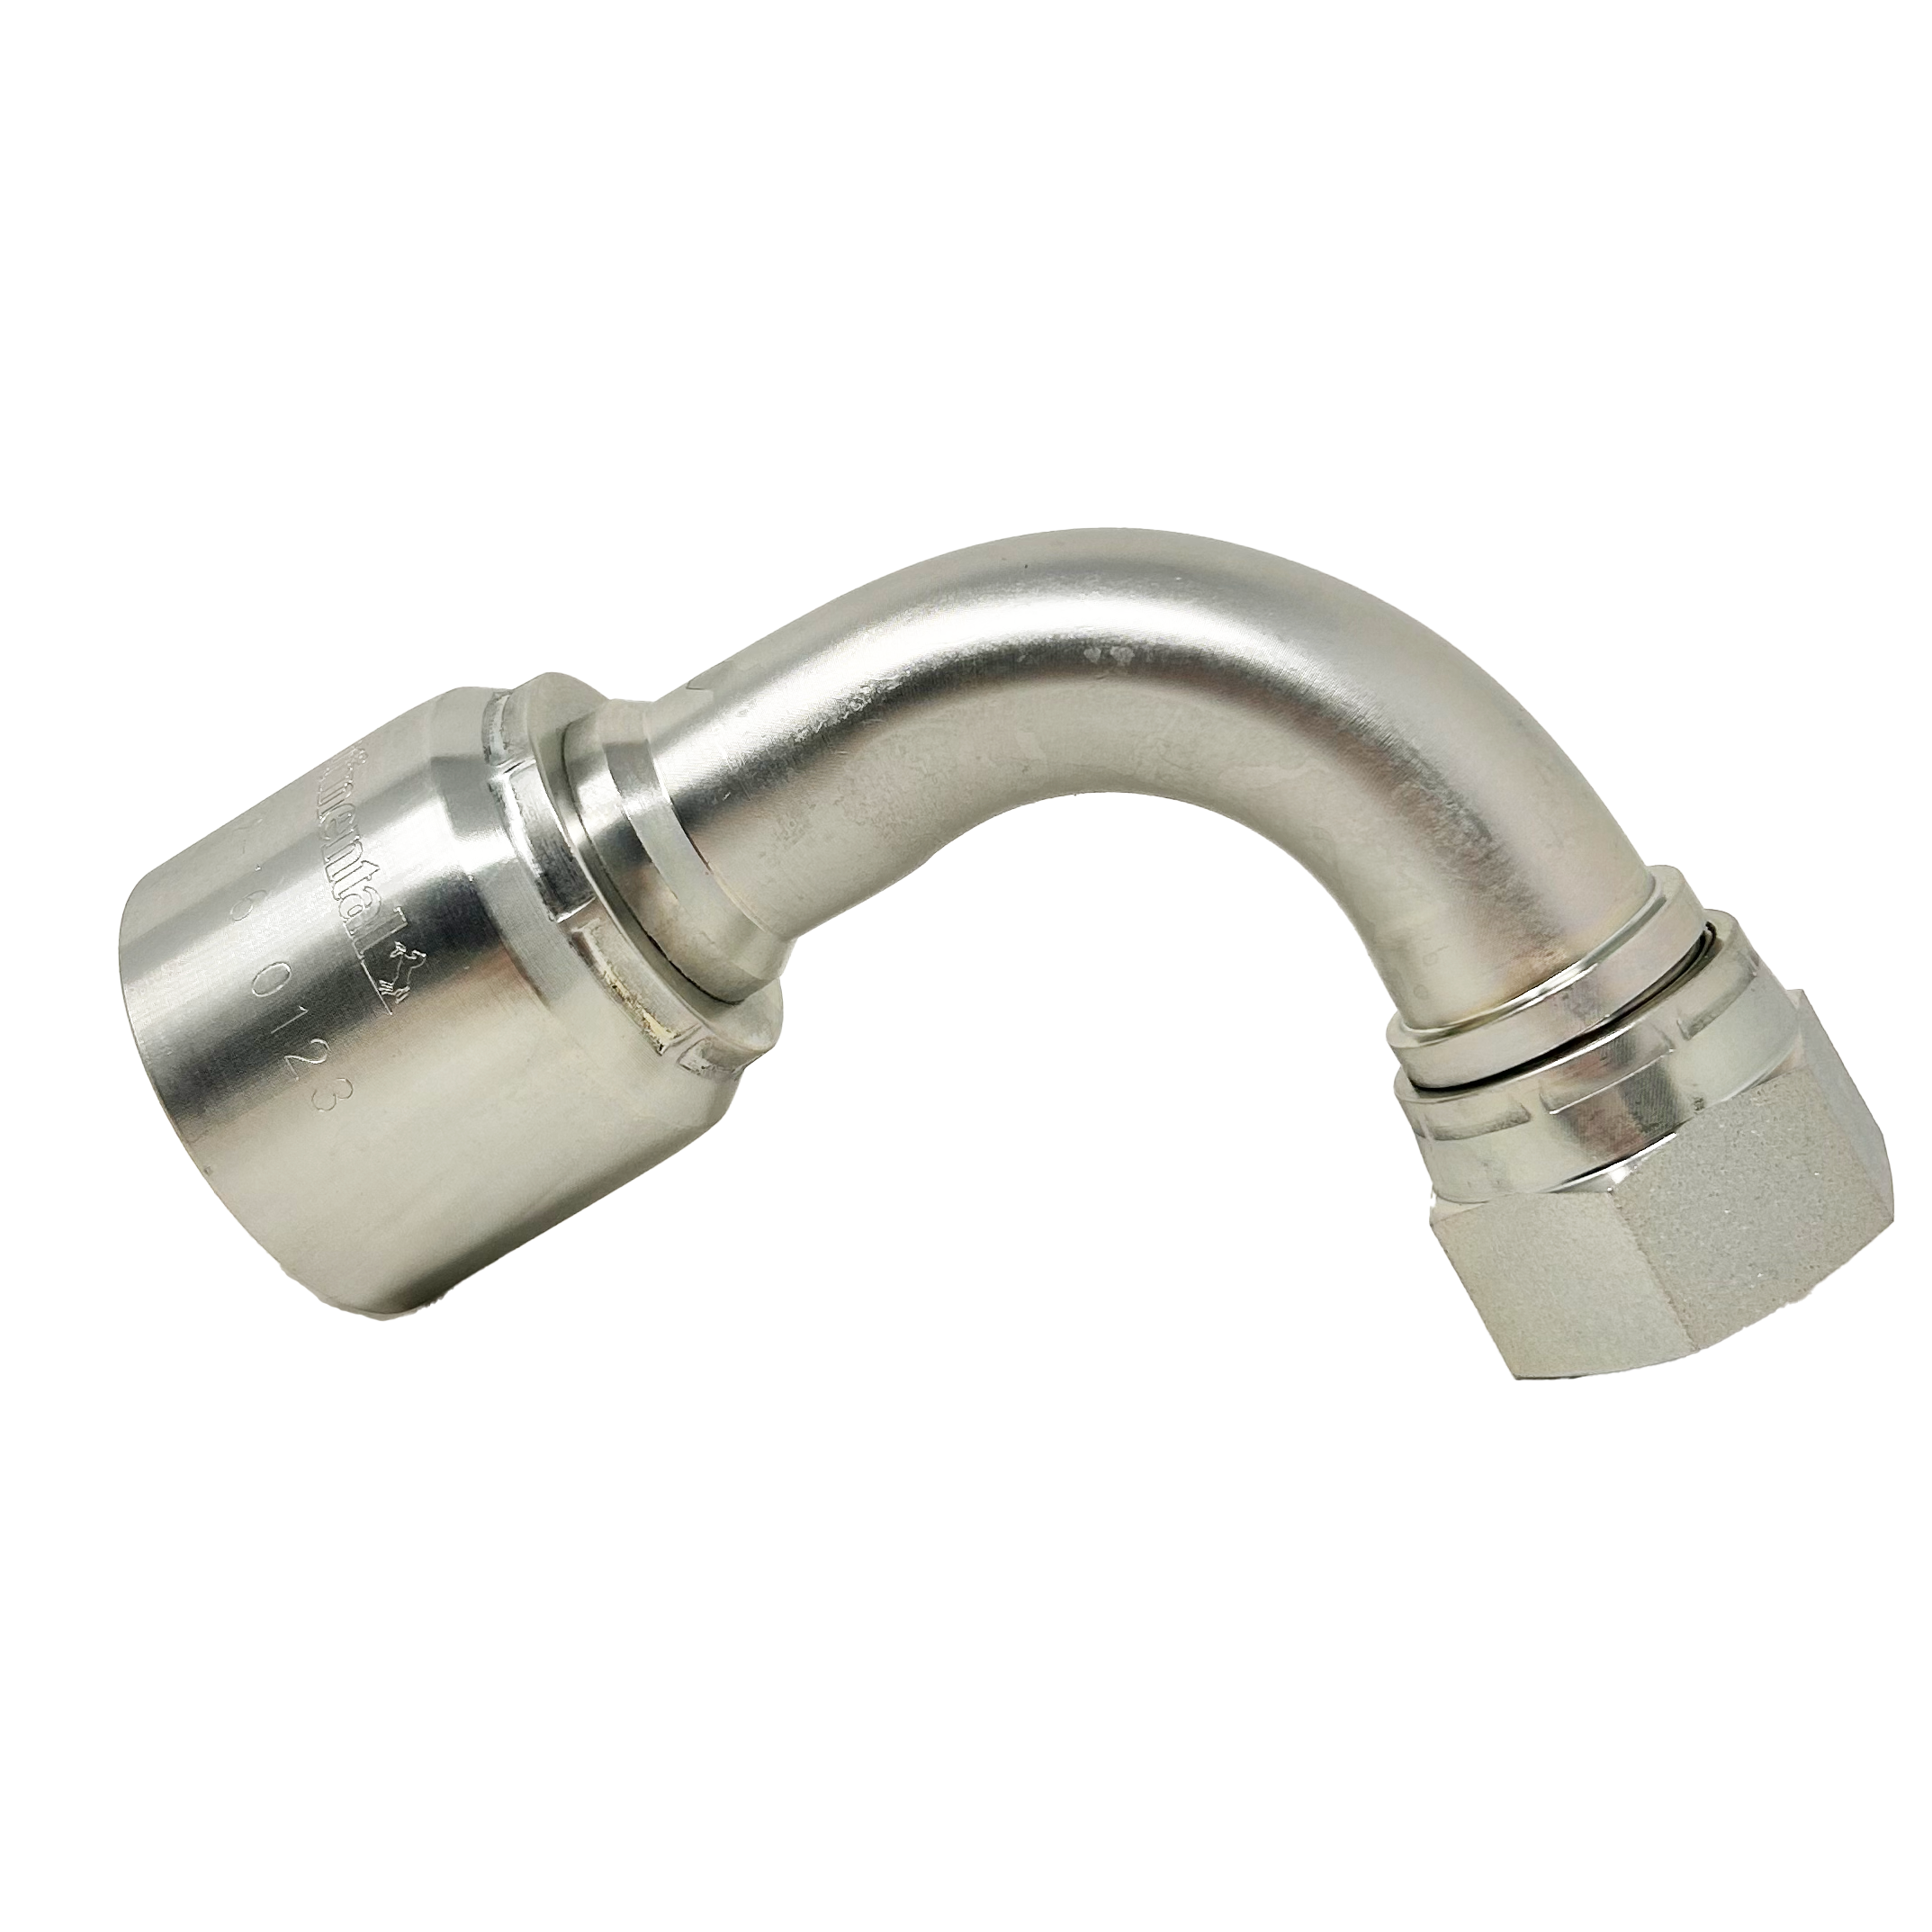 B2-JCFX90-0808: Continental Hose Fitting, 0.5 (1/2") Hose ID x 3/4-16 Female JIC, 90-Degree Swivel Connection